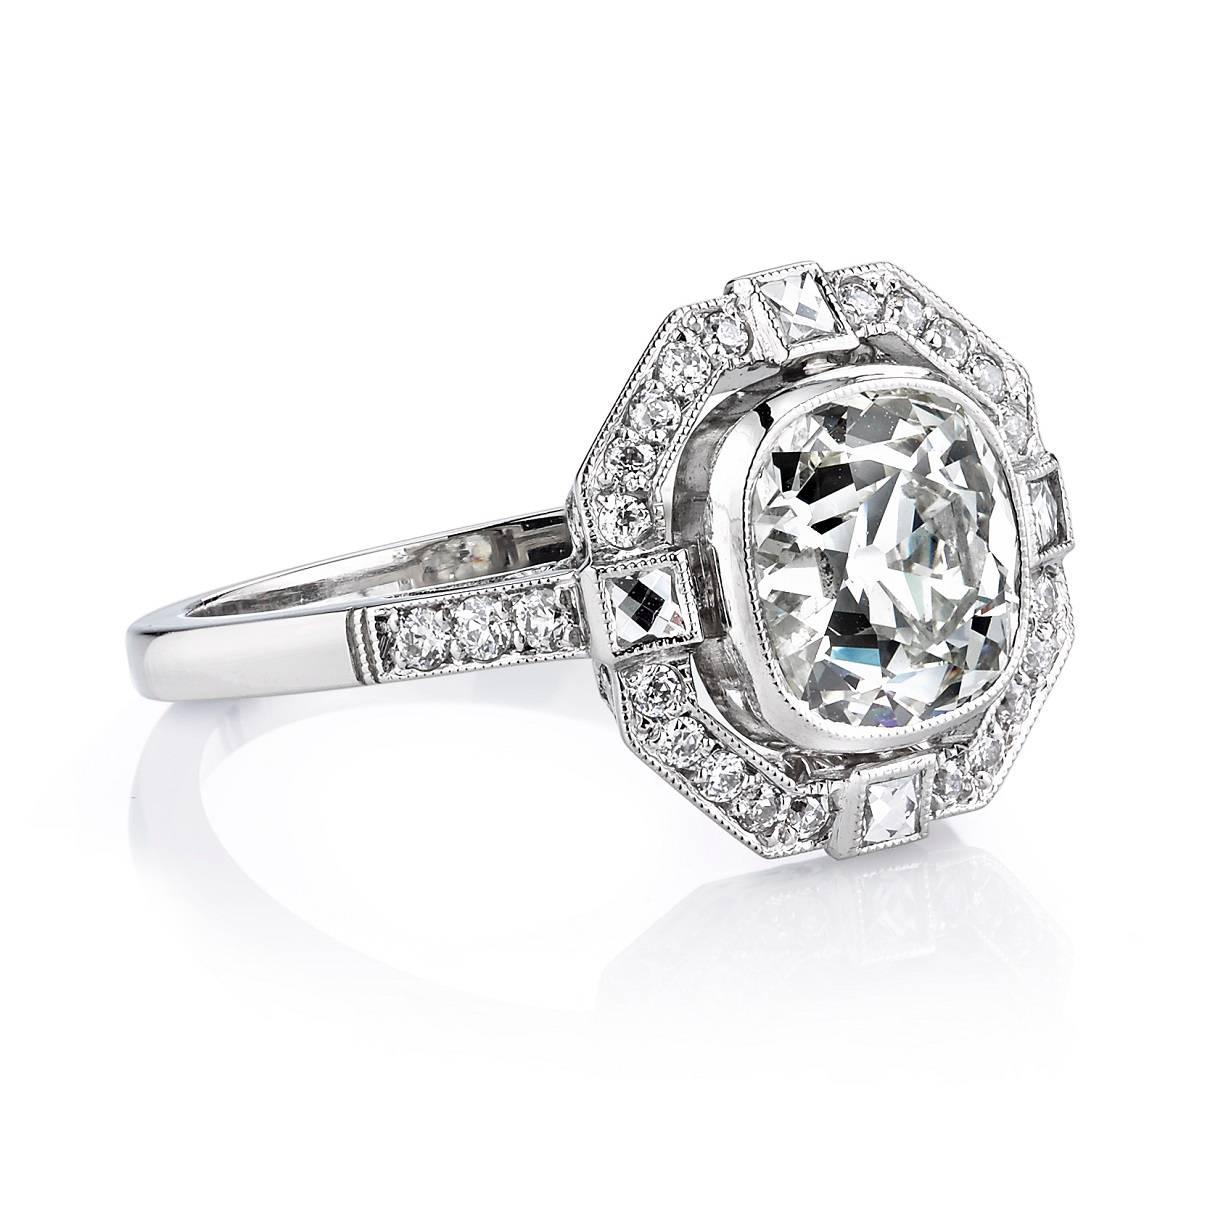 2.38ct K/VS2 EGL certified vintage Cushion cut diamond set in a handcrafted platinum mounting. An Art Deco design featuring a french cut and old European cut diamond halo.